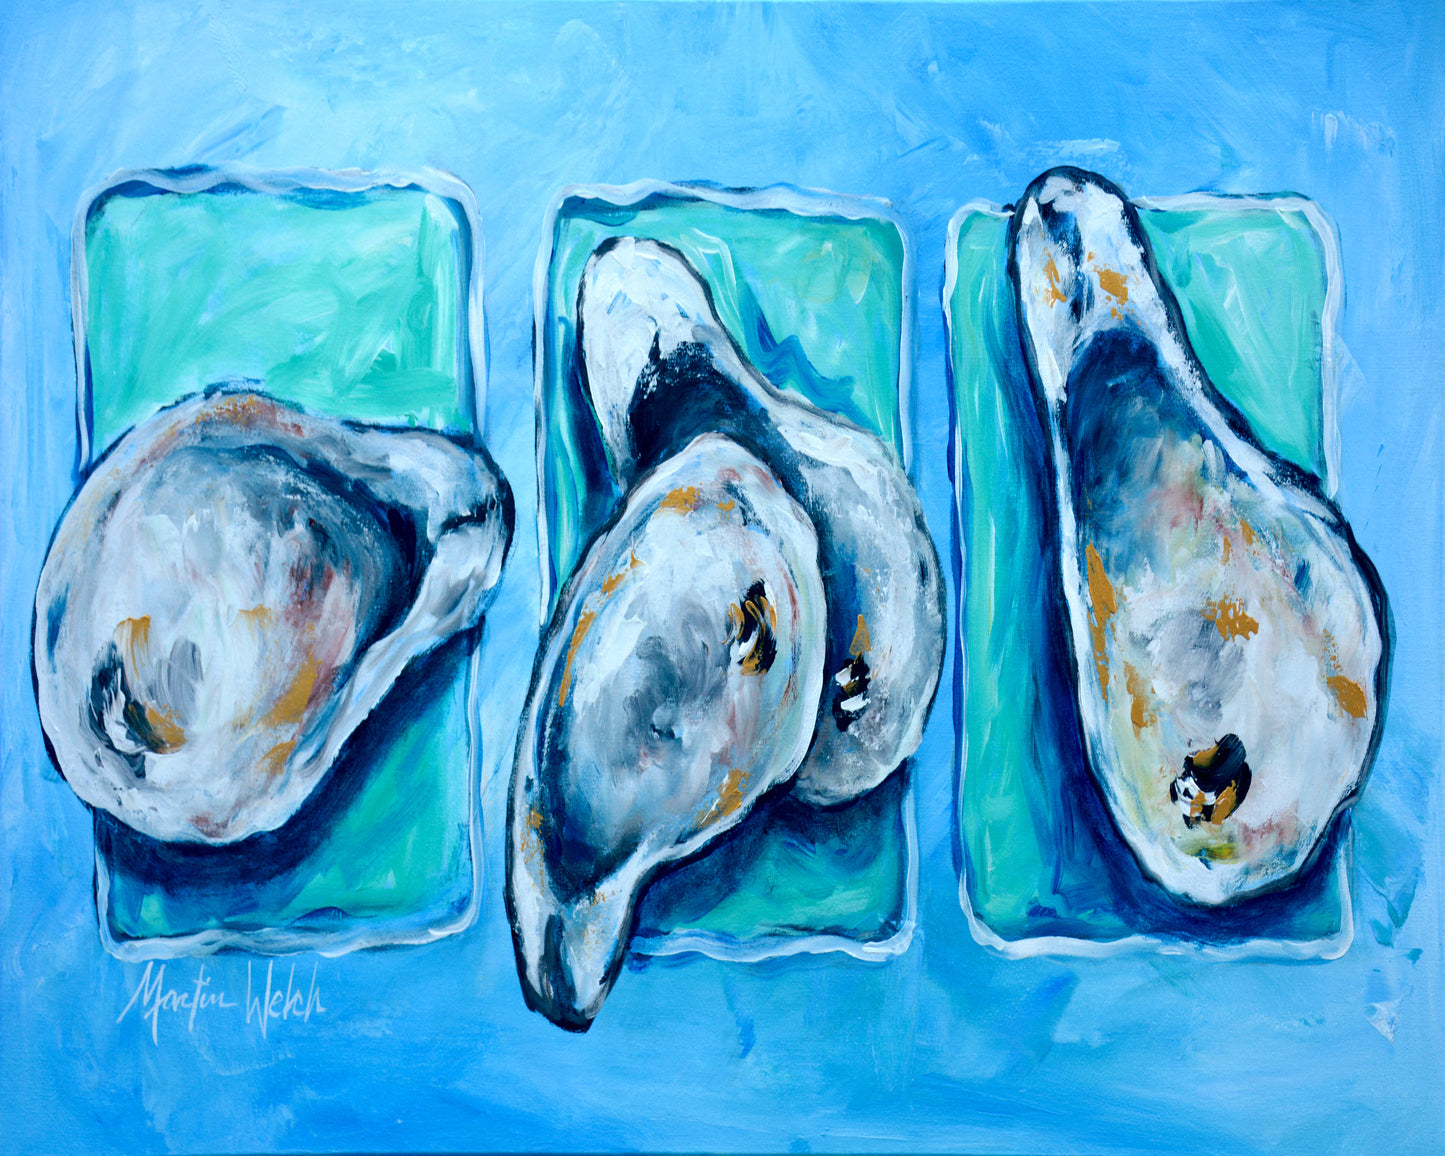 Oyster + Oyster = Oysters -  Oysters - 11"x14" Print